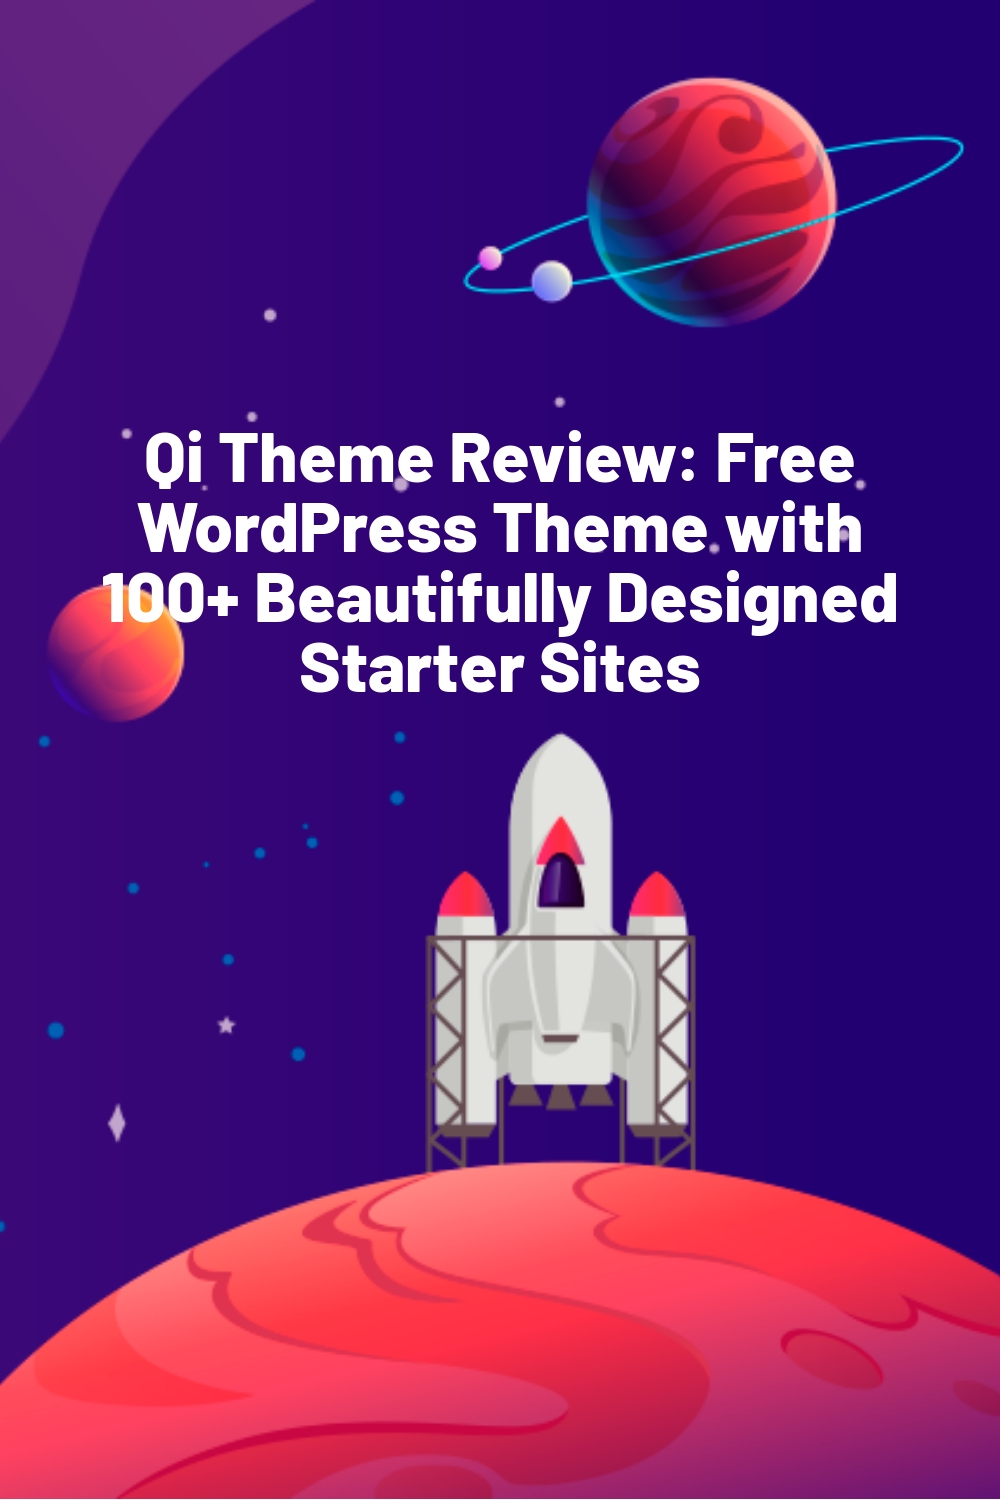 Qi Theme Review: Free WordPress Theme with 100+ Beautifully Designed Starter Sites